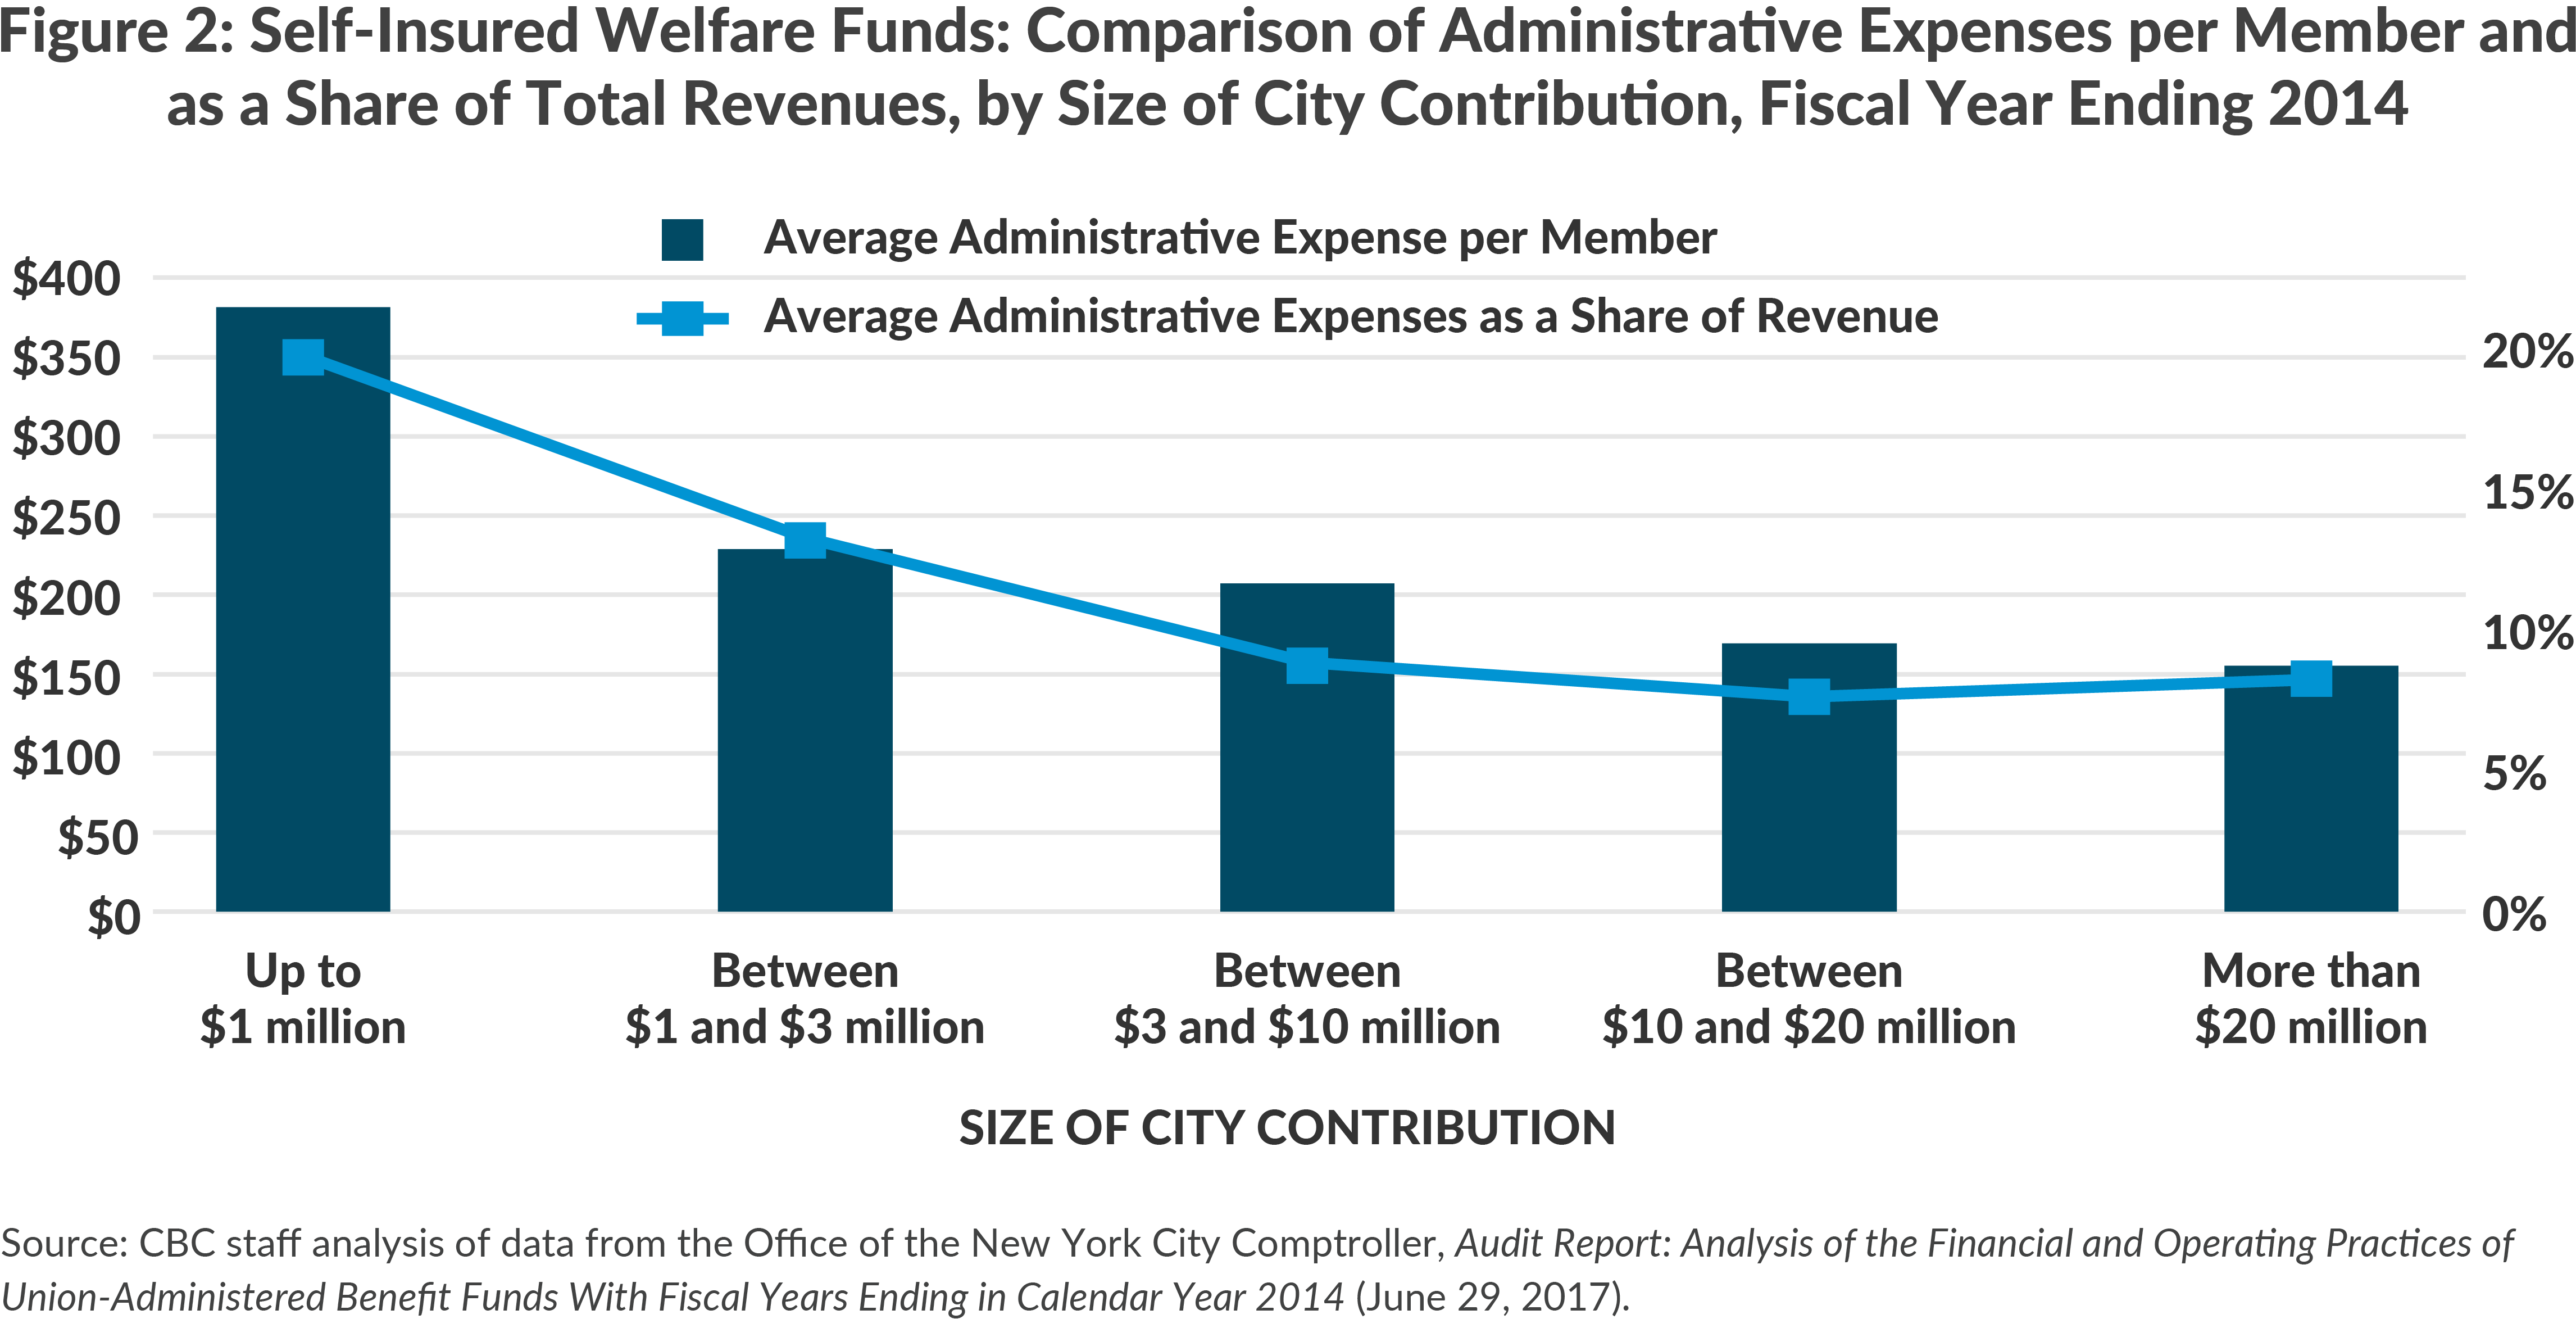 Figure 2: Self-Insured Welfare Funds: Comparison of Administrative Expenses per Member and as a Share of Total Revenues, by Size of City Contribution, Fiscal Year Ending 2014